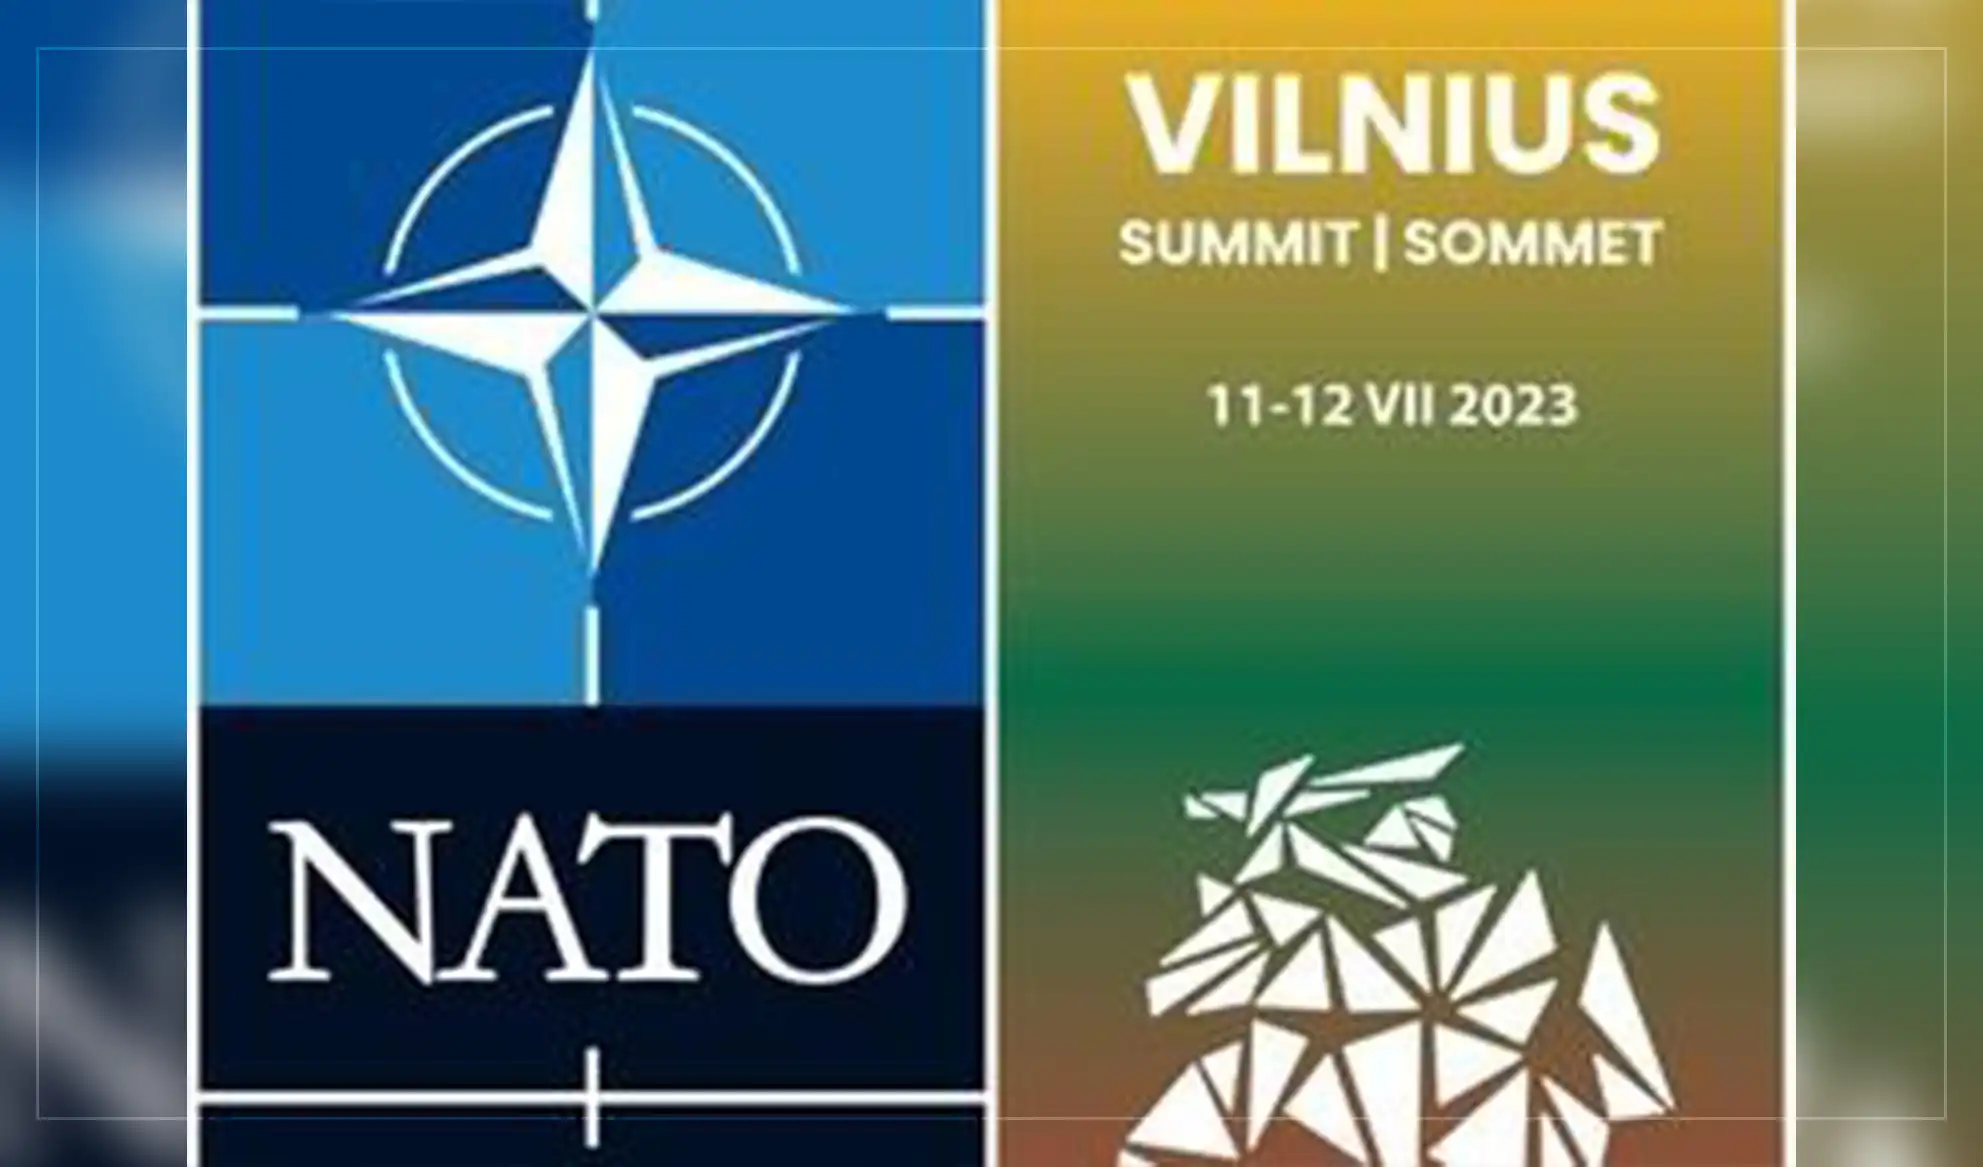 Afghanistan not on agenda as NATO leaders gather in Lithuania